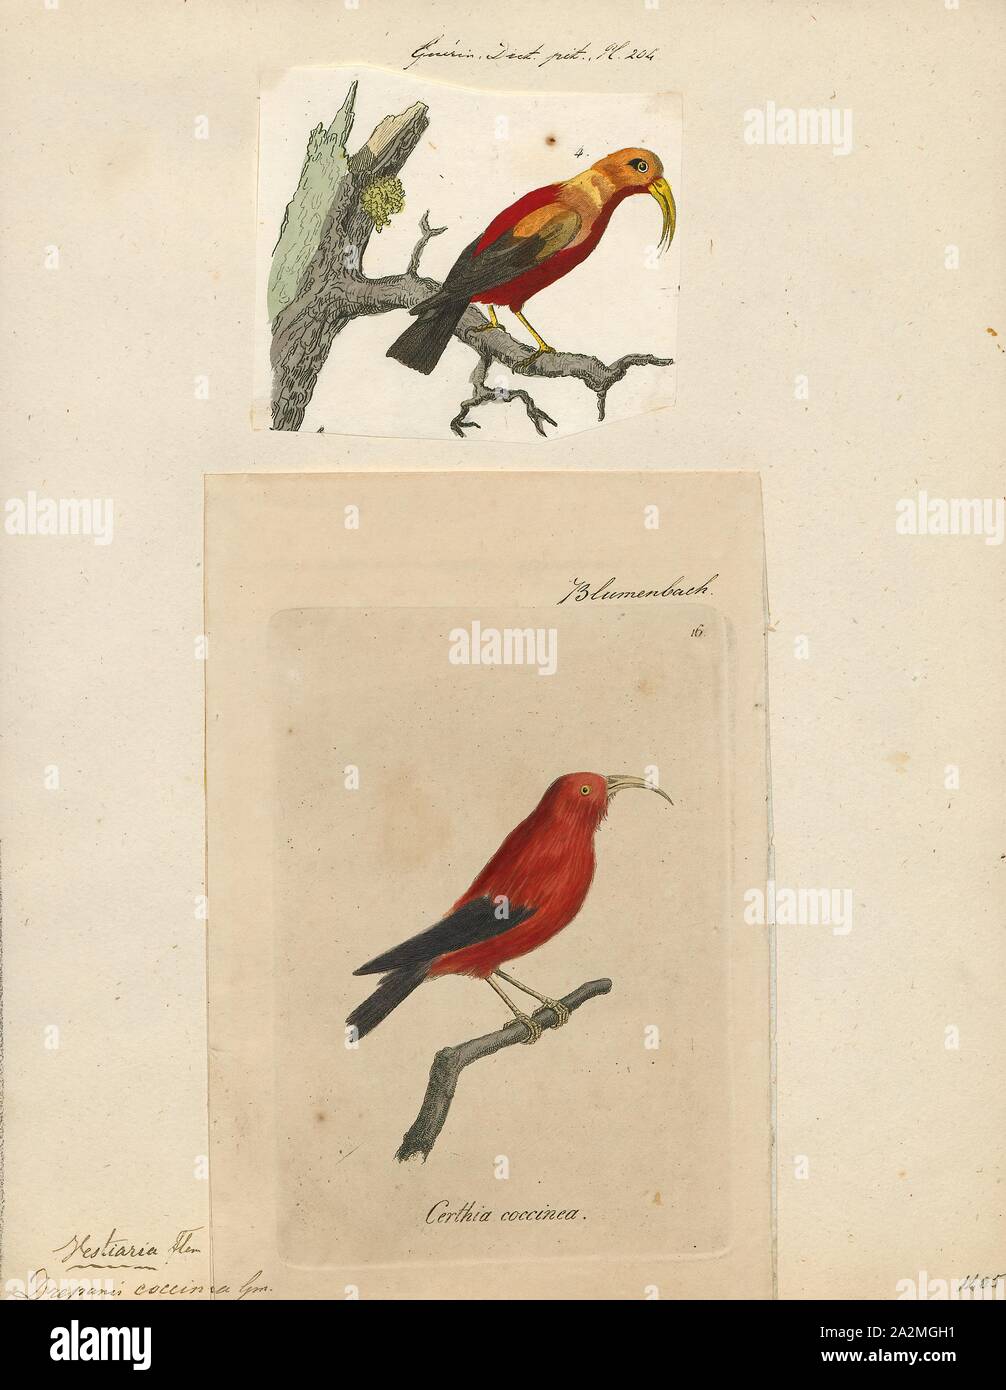 Drepanis coccinea, Print, The 'I'iwi, or scarlet honeycreeper is a species of Hawaiian honeycreeper. The 'I'iwi is a highly recognizable symbol of Hawaii. The 'I'iwi is the third most common native land bird in the Hawaiian Islands. Large colonies of 'I'iwi inhabit the islands of Hawaii, Maui, and Kaua'i, with smaller populations on Moloka'i but are no longer present on Lāna'i and O'ahu. ʻIʻiwi populations on Kauaʻi are decreasing while there are stable populations on Maui and Hawaii., 1700-1880 Stock Photo